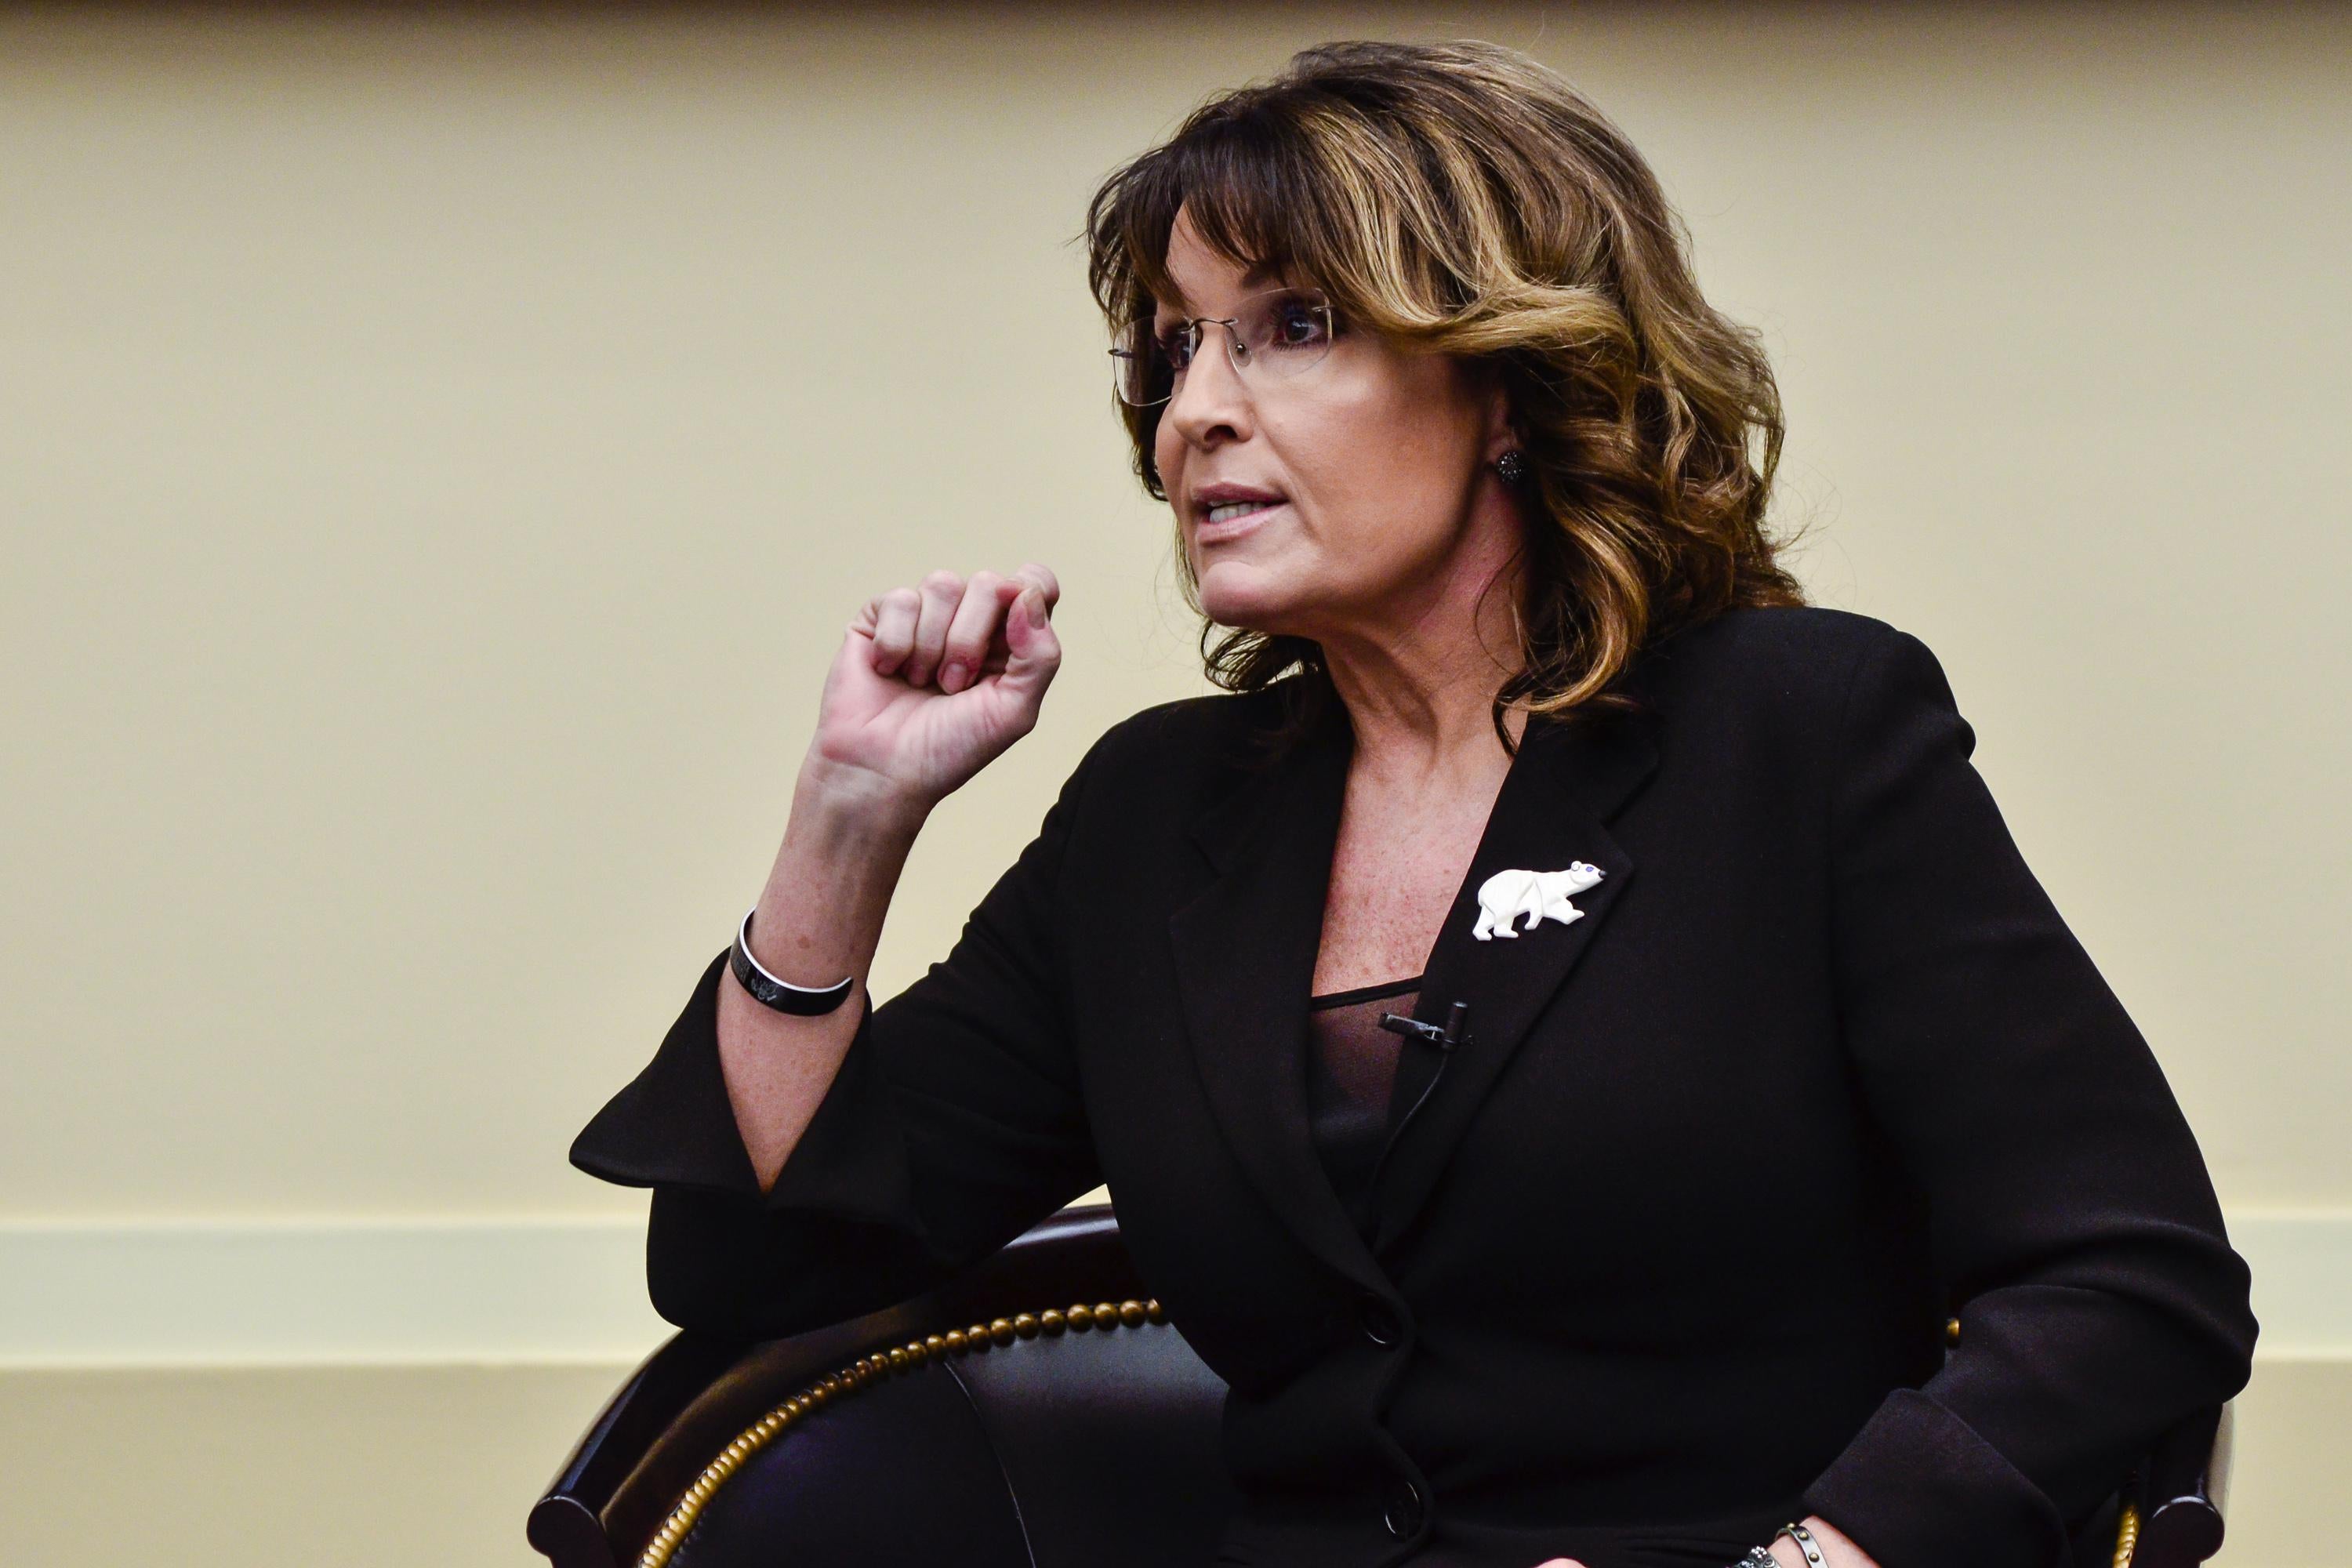 Sarah Palin sits in a chair, speaking. She wears a pin with a bear on it.